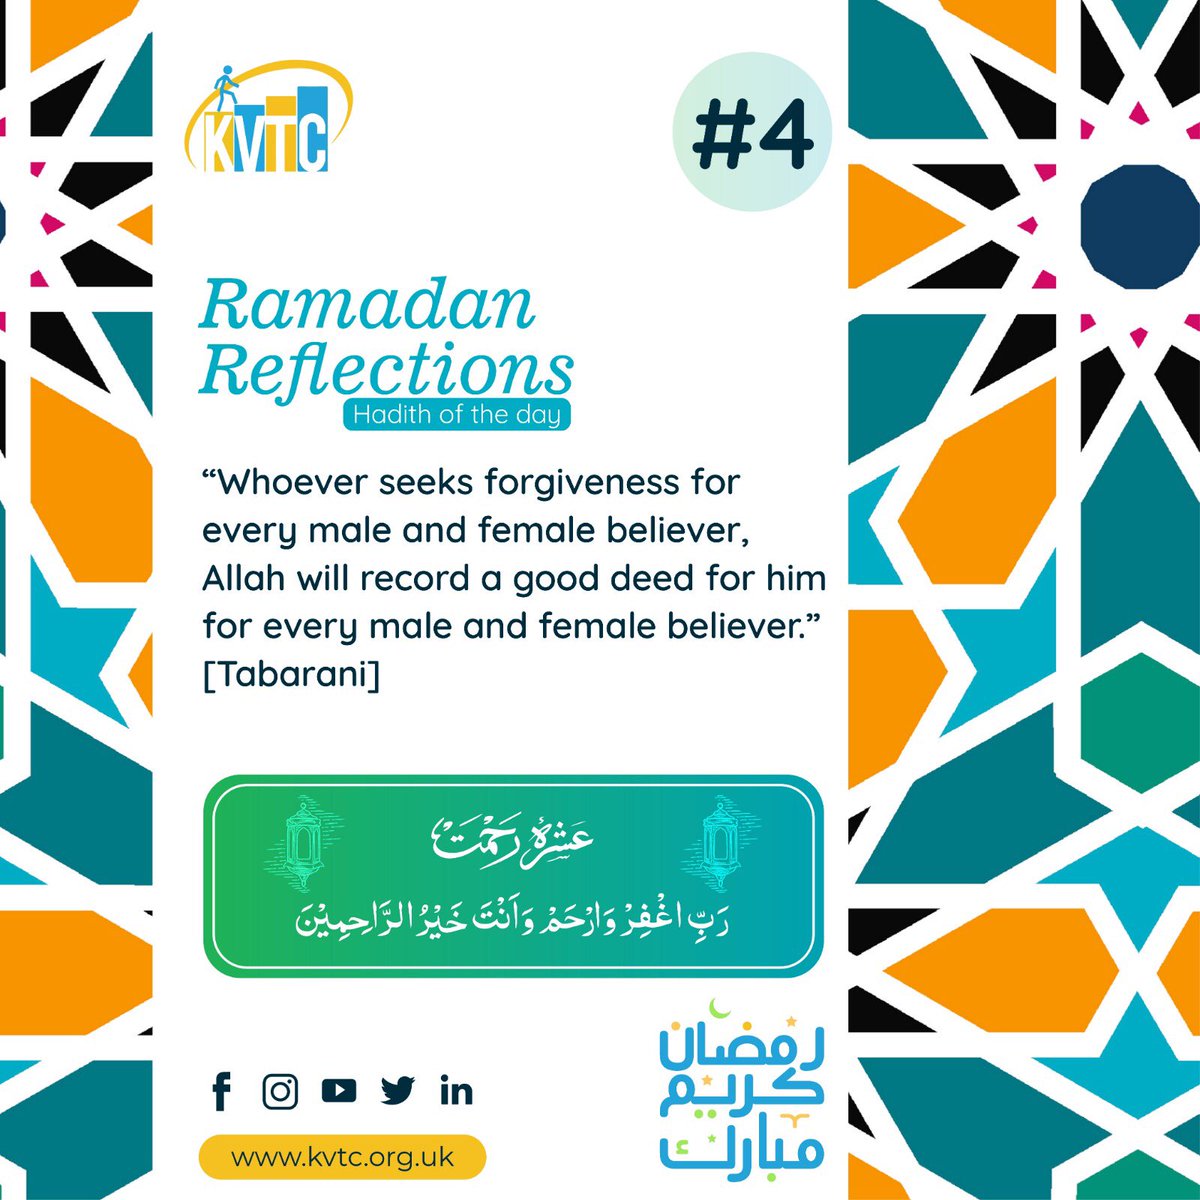 Ramadan reminder #4

Be kind and forgive others, you will be rewarded by Allah (swt) for it. 

#ramadanreflections #ramadanreminders #ramadanreminder #kvtc #ramadankareem #forgive #alhamdulillah #islamislove #islamicquotes